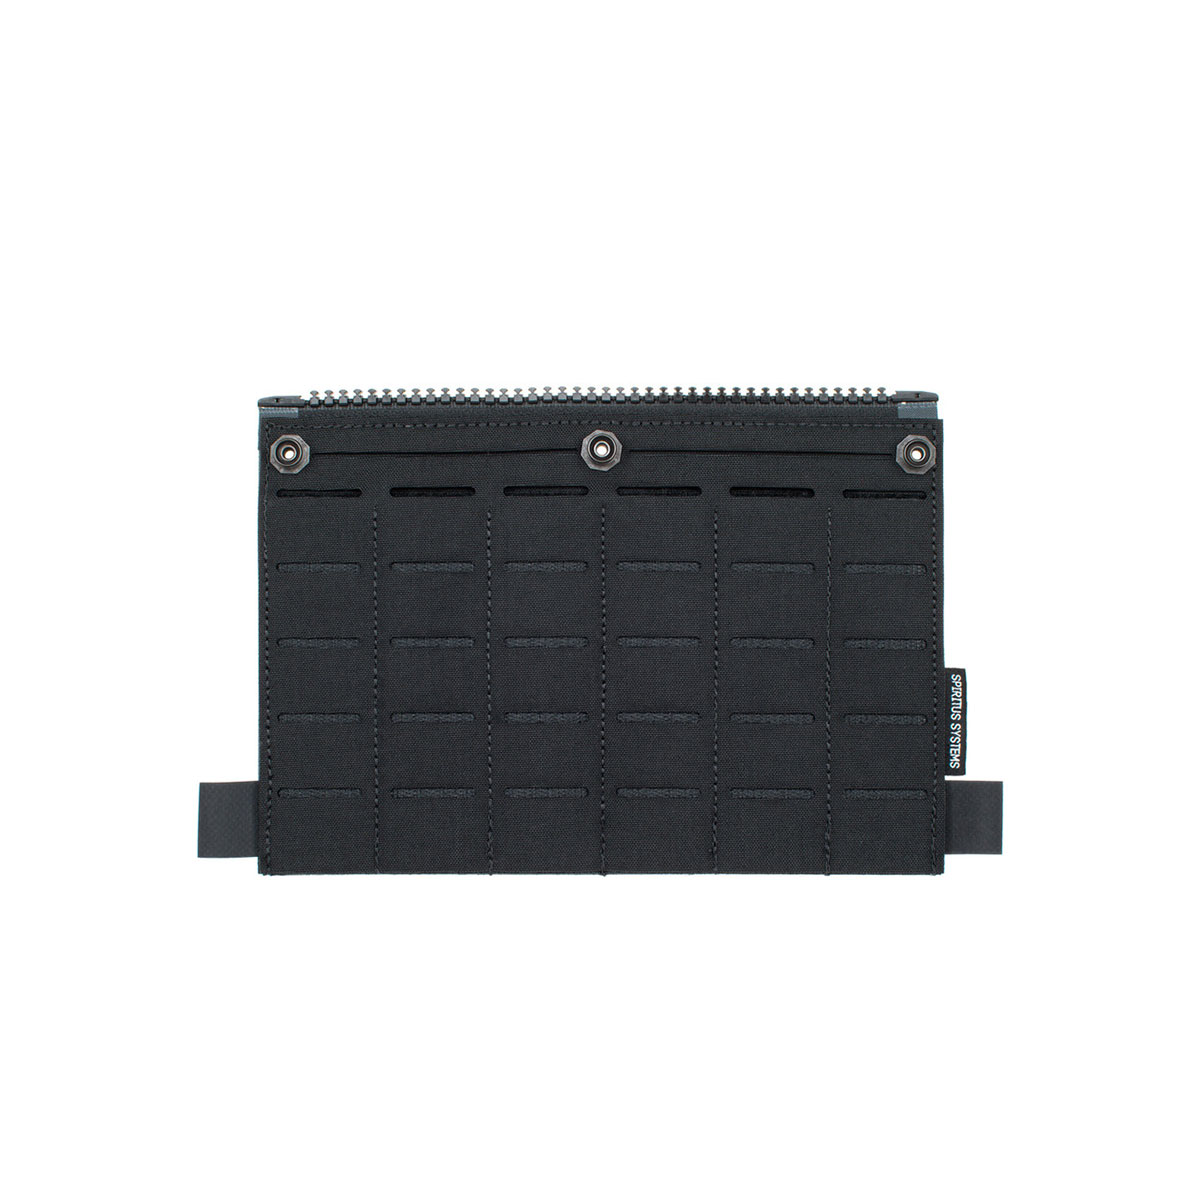 SPIRITUS SYSTEMS - BACK PANEL MOLLE FLAP